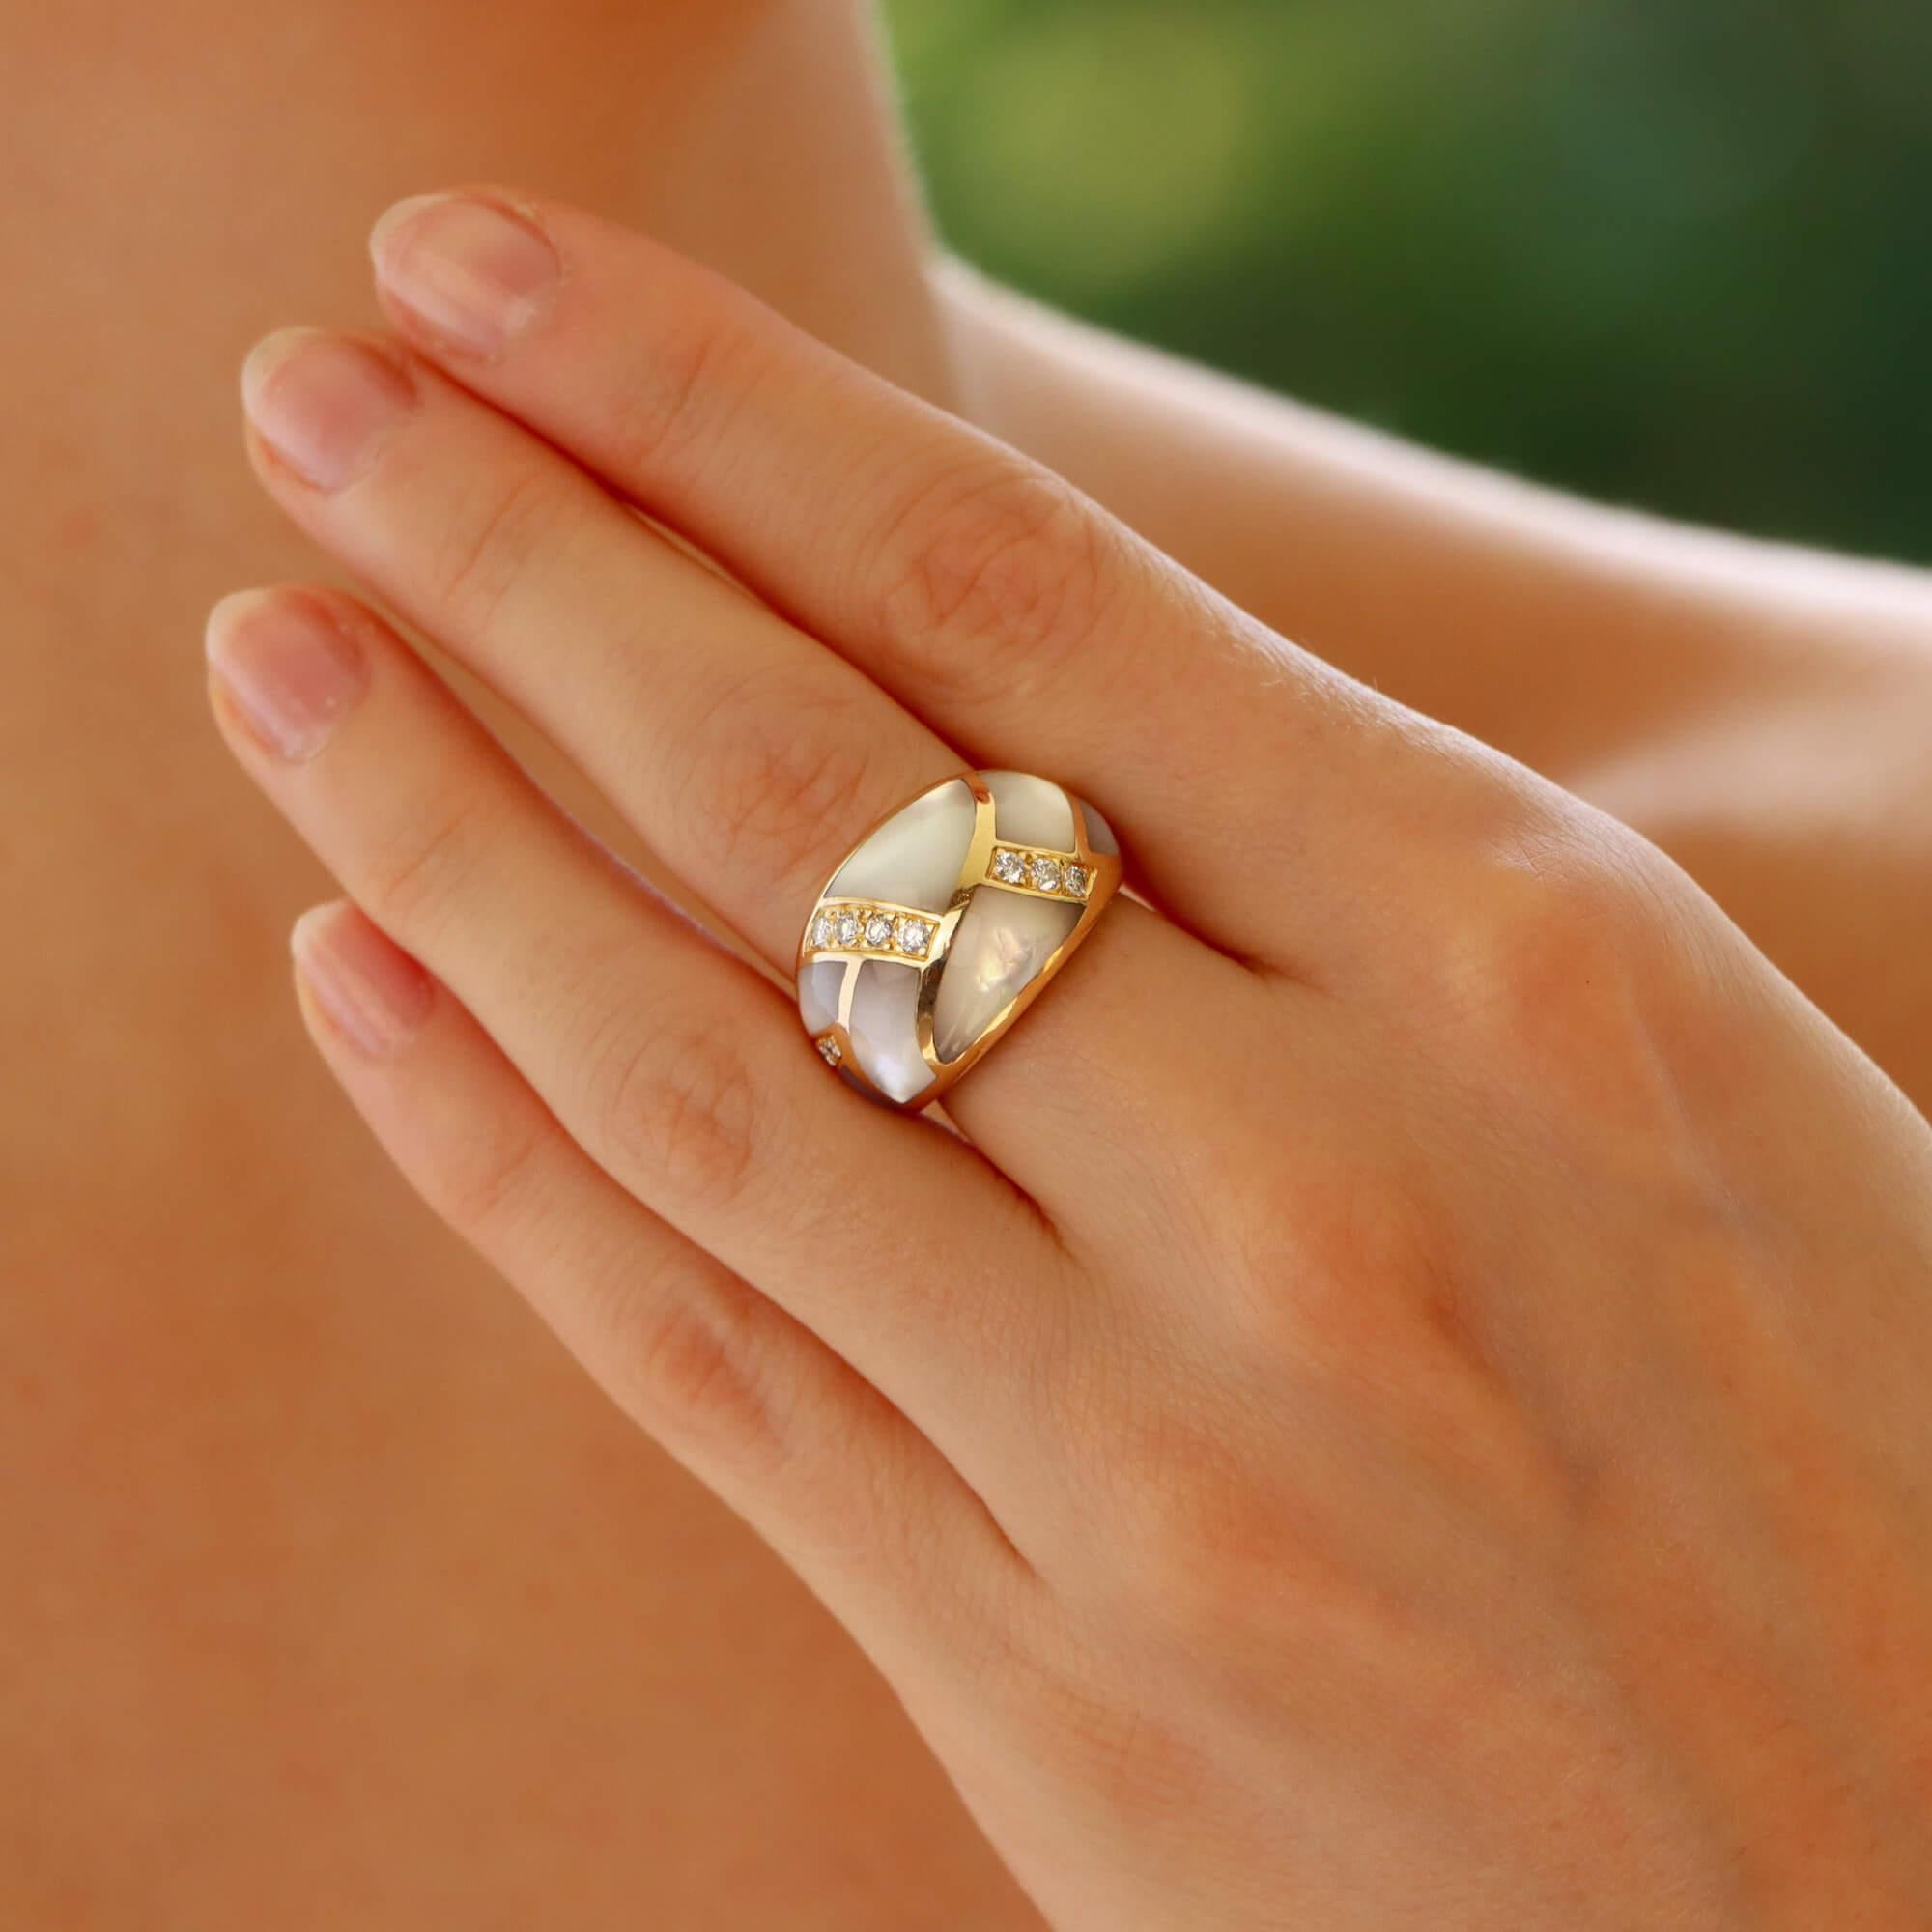 A beautiful vintage mother of pearl and diamond bombé ring set in 14k yellow gold.

The ring is designed in a raised bombé design and is set with a rub over set pieces of mother of pearl and claw set diamonds.

Due to the design, this piece stands